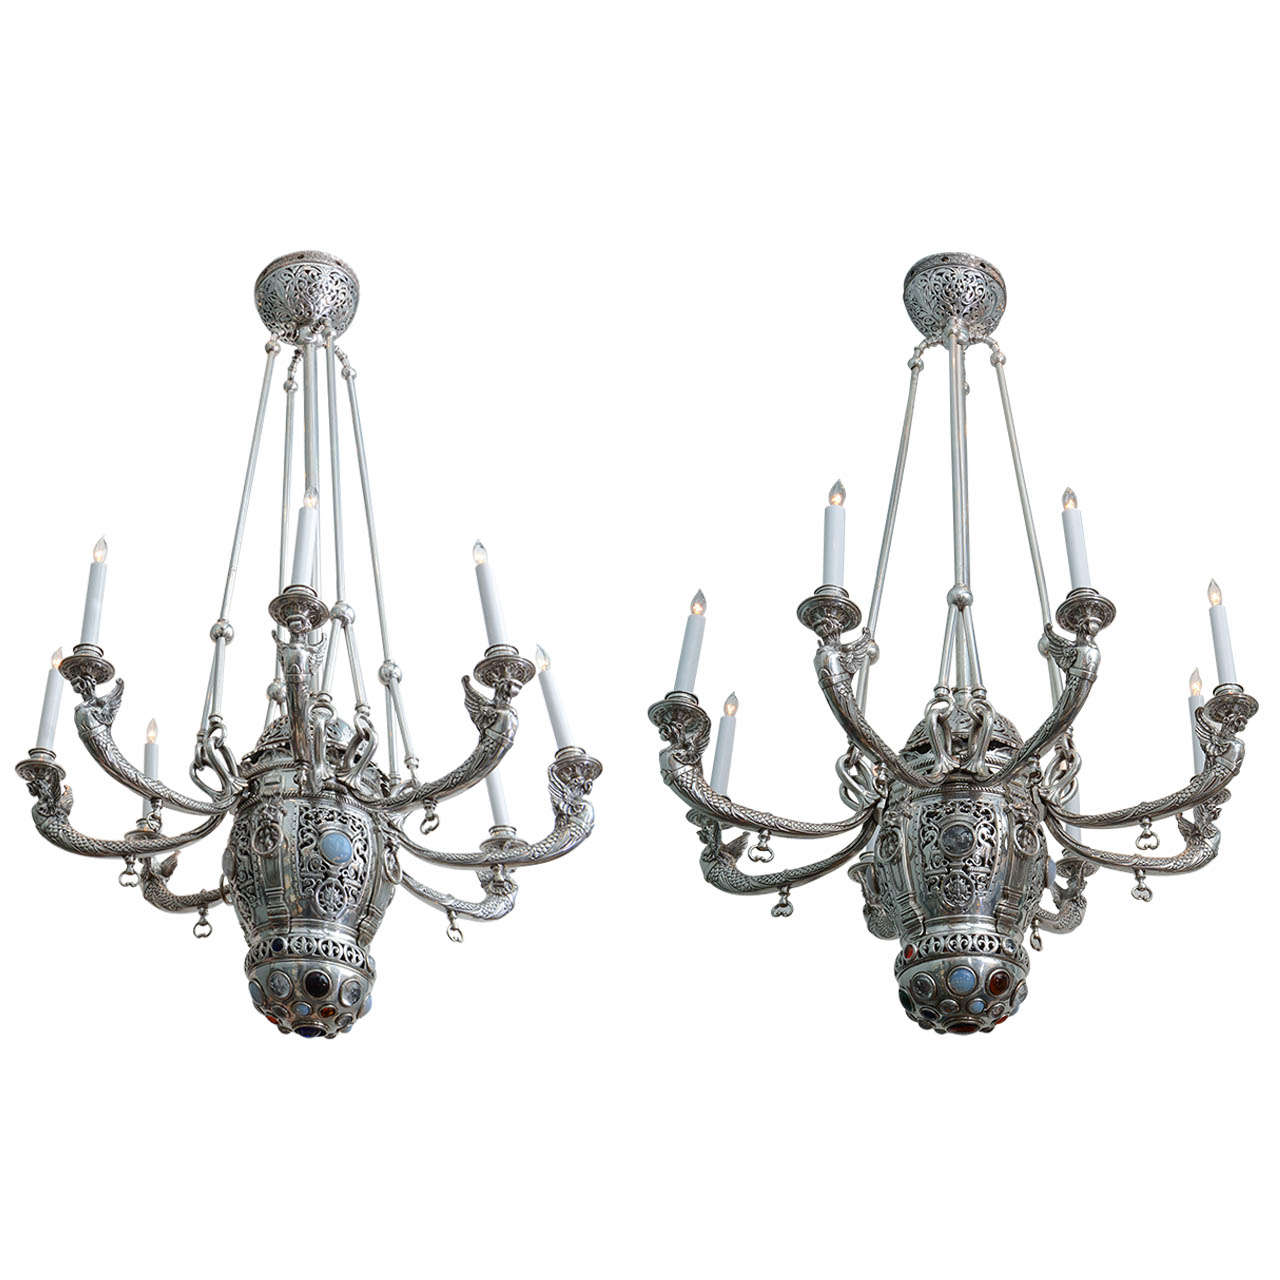 Silver Bronze Neo-Gothic/Moorish Chandeliers Attributed to Tiffany Studios For Sale